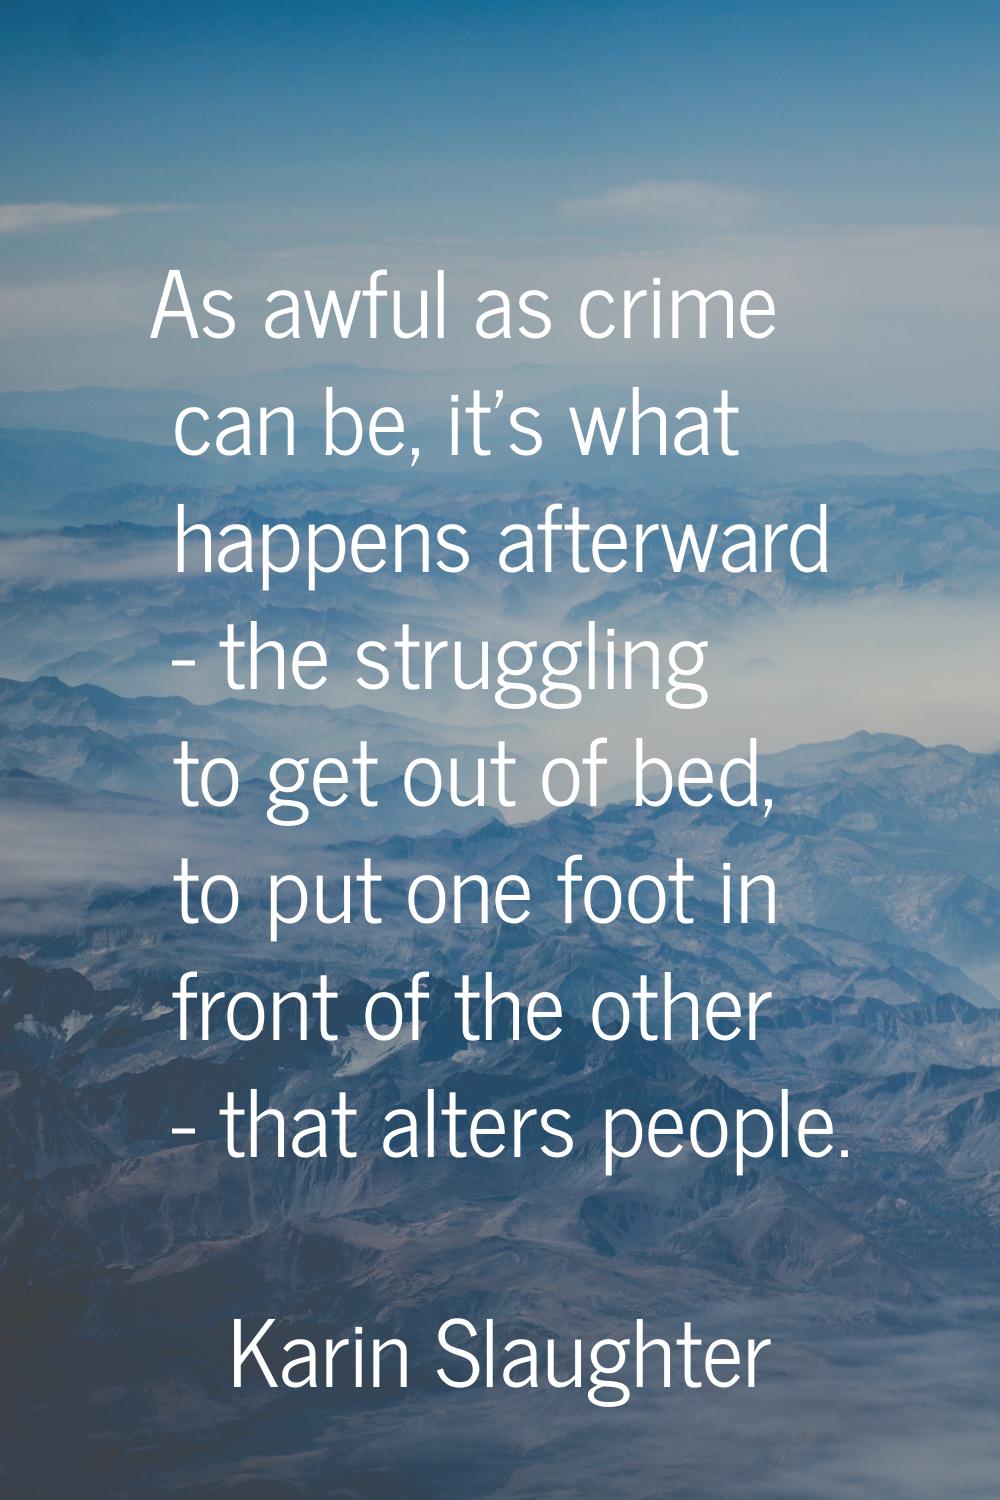 As awful as crime can be, it's what happens afterward - the struggling to get out of bed, to put on